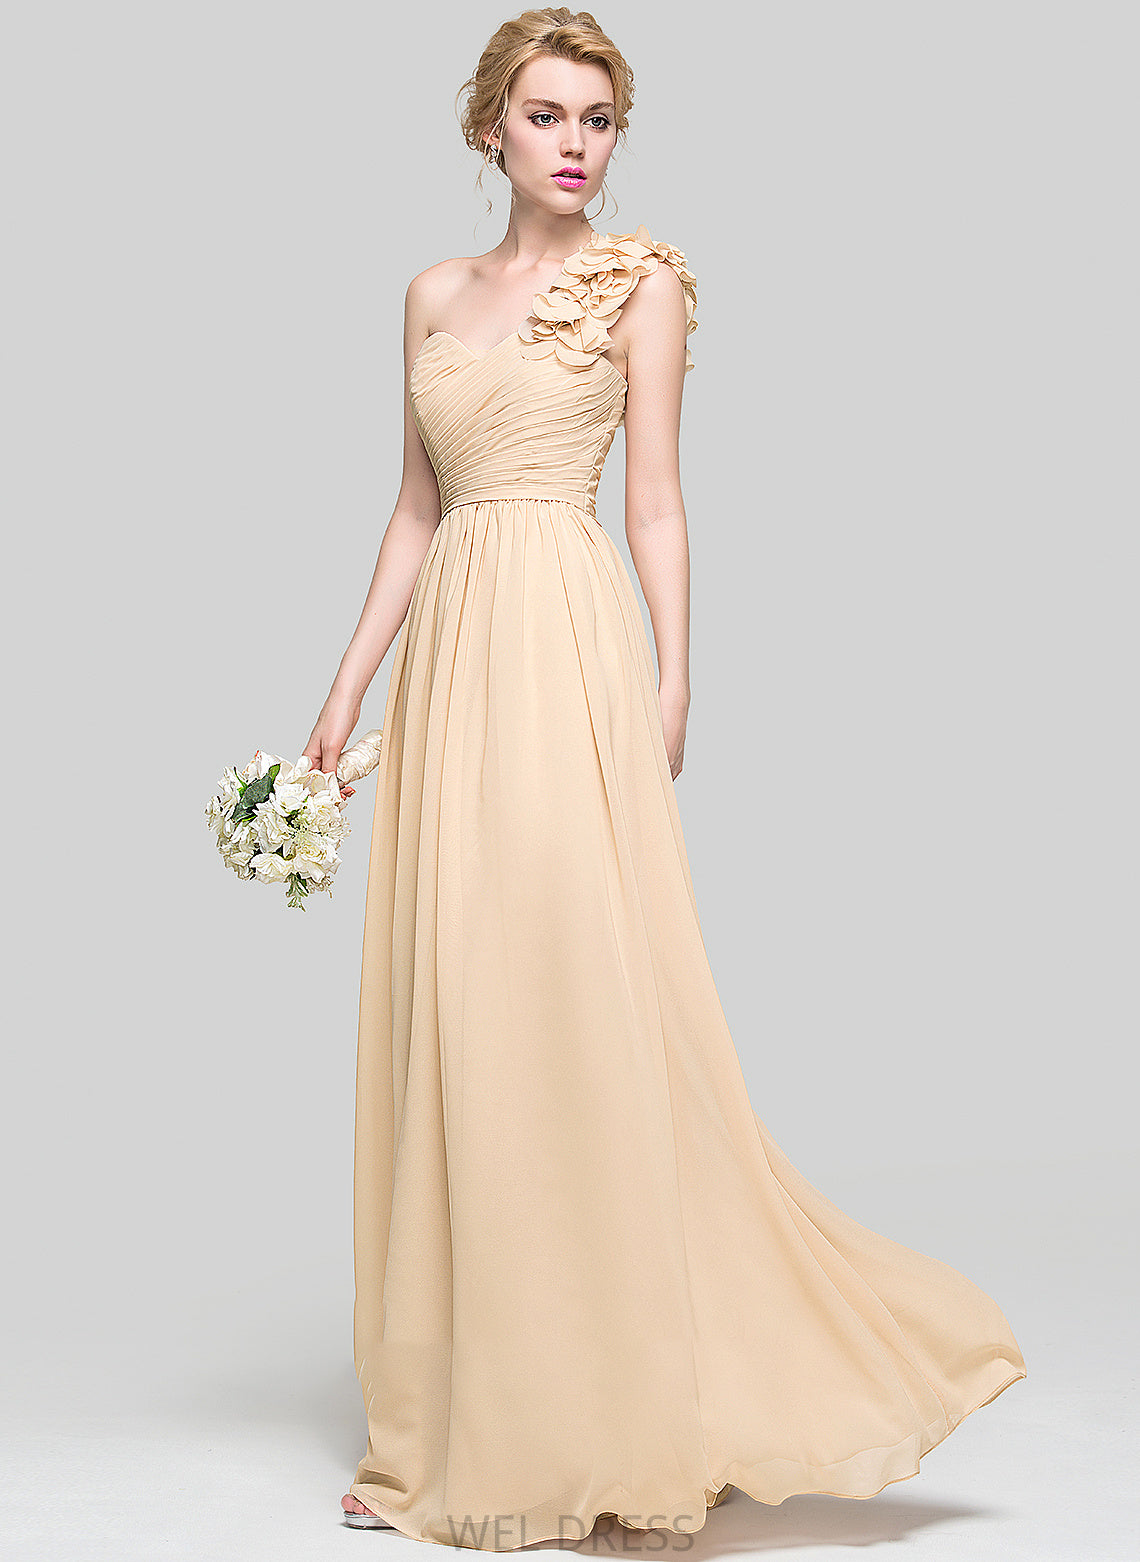 With Chiffon A-Line Floor-Length Prom Dresses Flower(s) Sydney Ruffle One-Shoulder